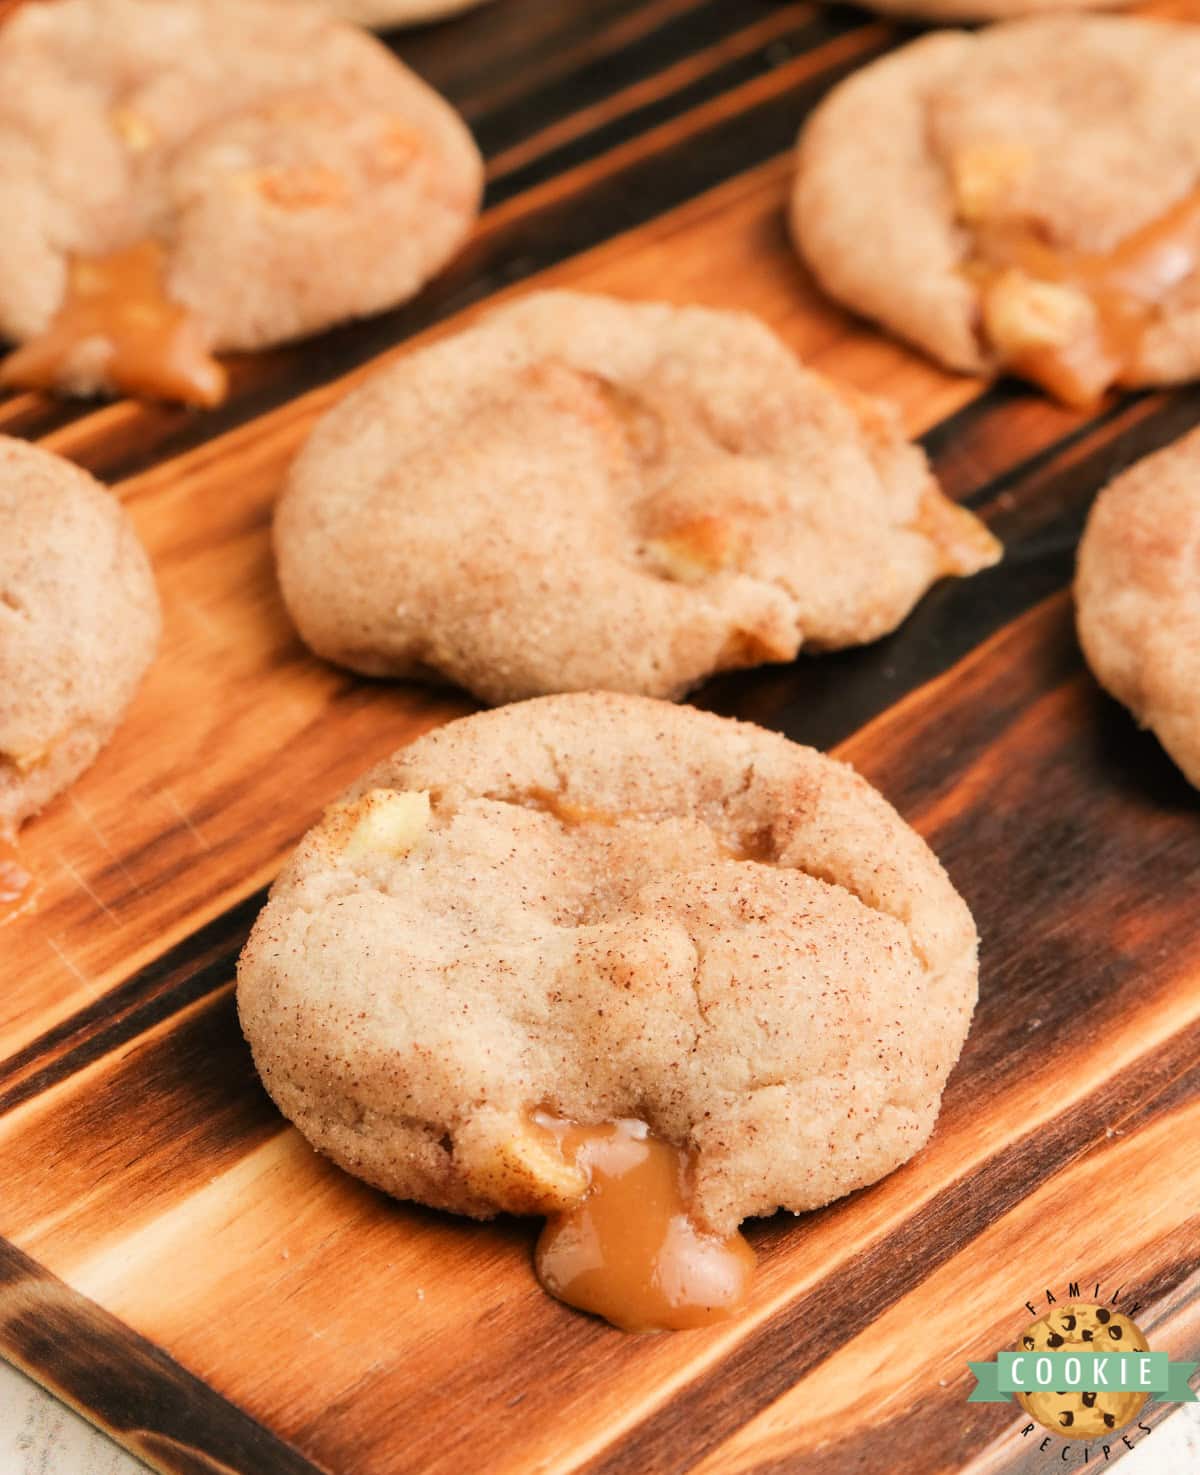 Caramel Apple Snickerdoodles add fresh apples and a gooey caramel filling to your favorite snickerdoodle cookie recipe. Soft and chewy cinnamon sugar cookies that are perfect for fall!